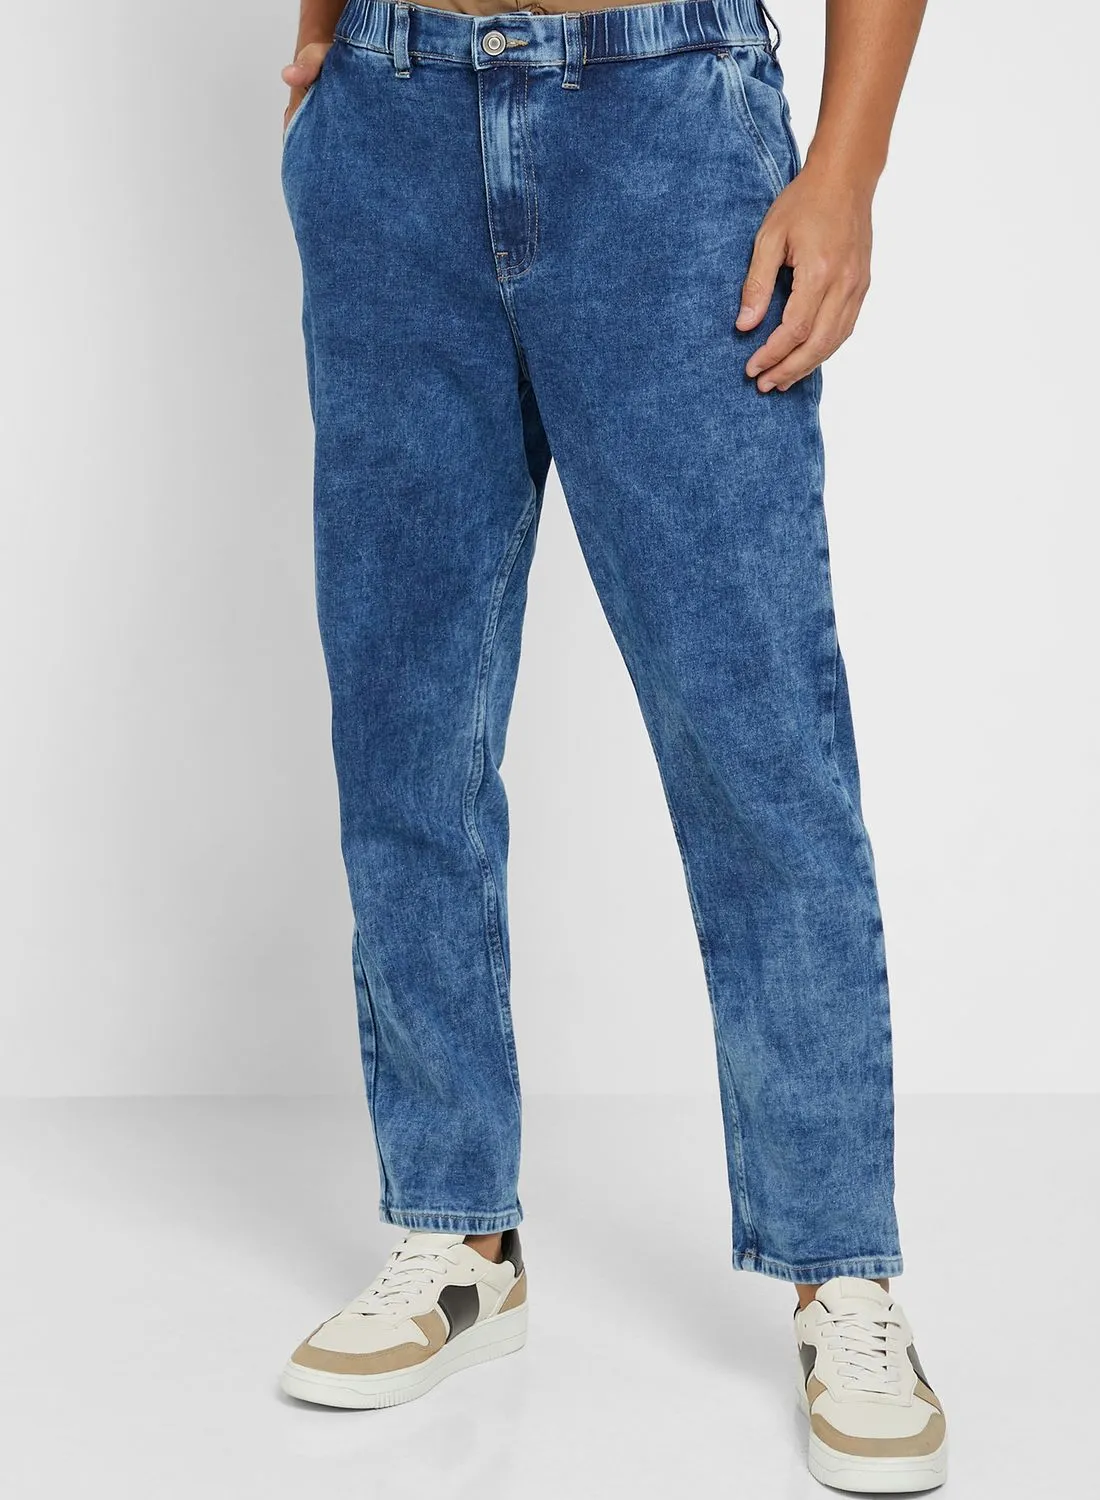 Seventy Five Elasticated Waistband Relaxed Fit Jeans